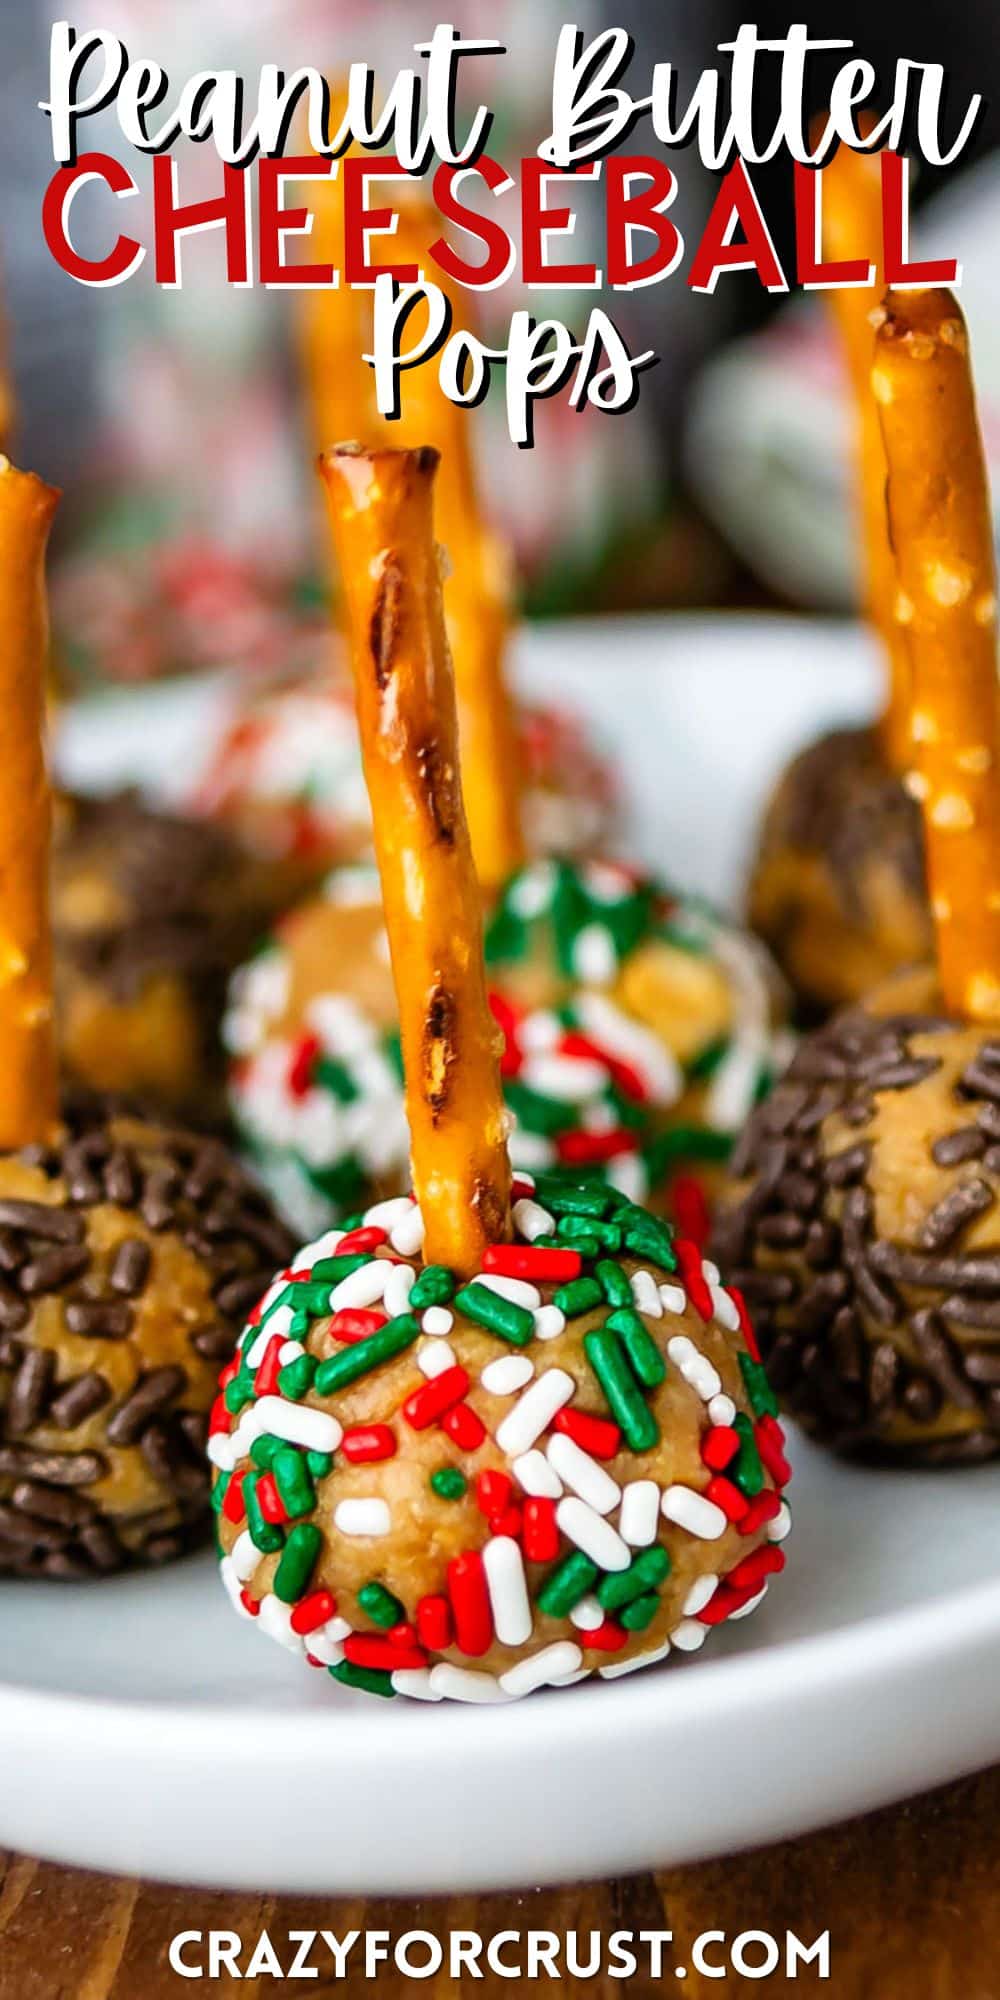 peanut butter balls with sprinkles pressed in the side on a pretzel stick with words on the image.